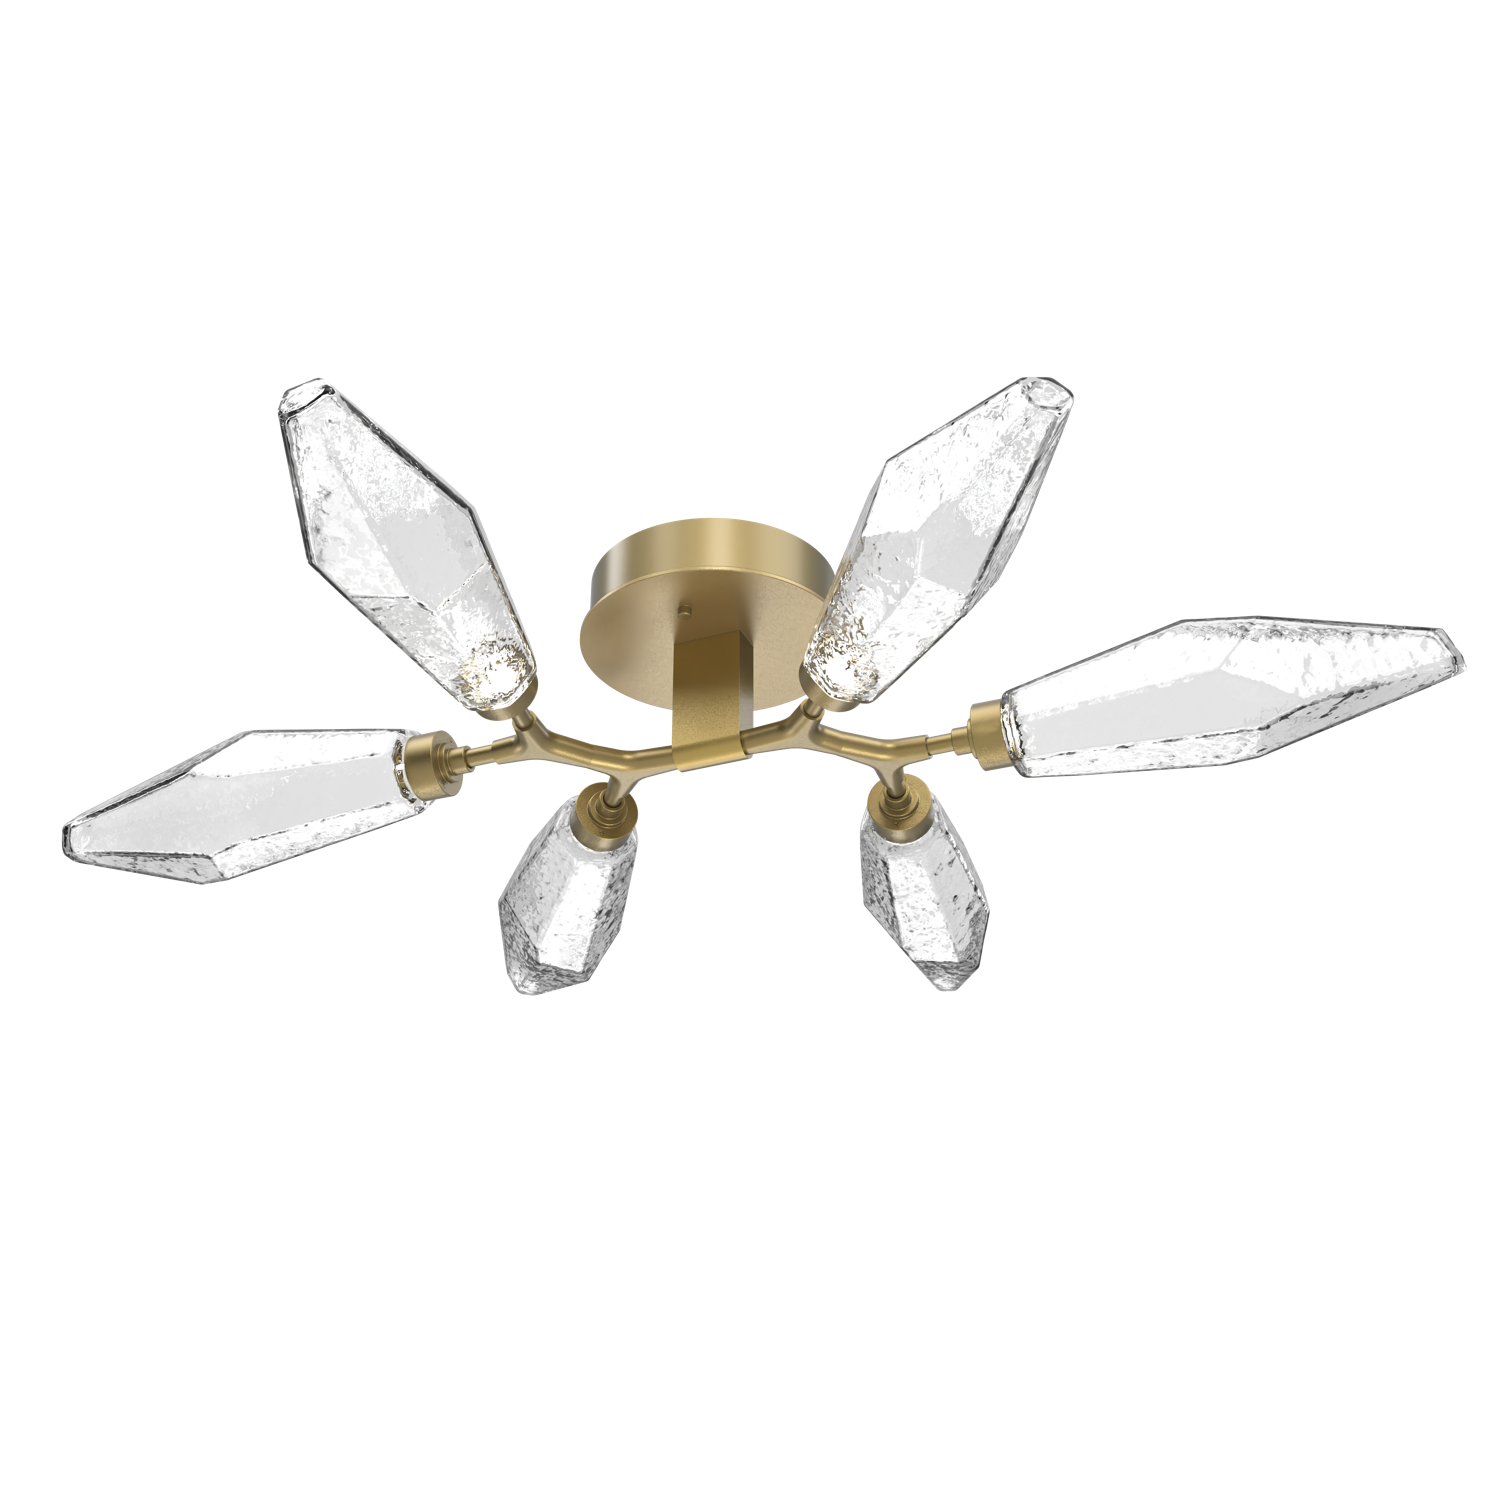 CLB0050-01-GB-CC-Hammerton-Studio-Rock-Crystal-flush-mount-light-with-gilded-brass-finish-and-clear-glass-shades-and-LED-lamping